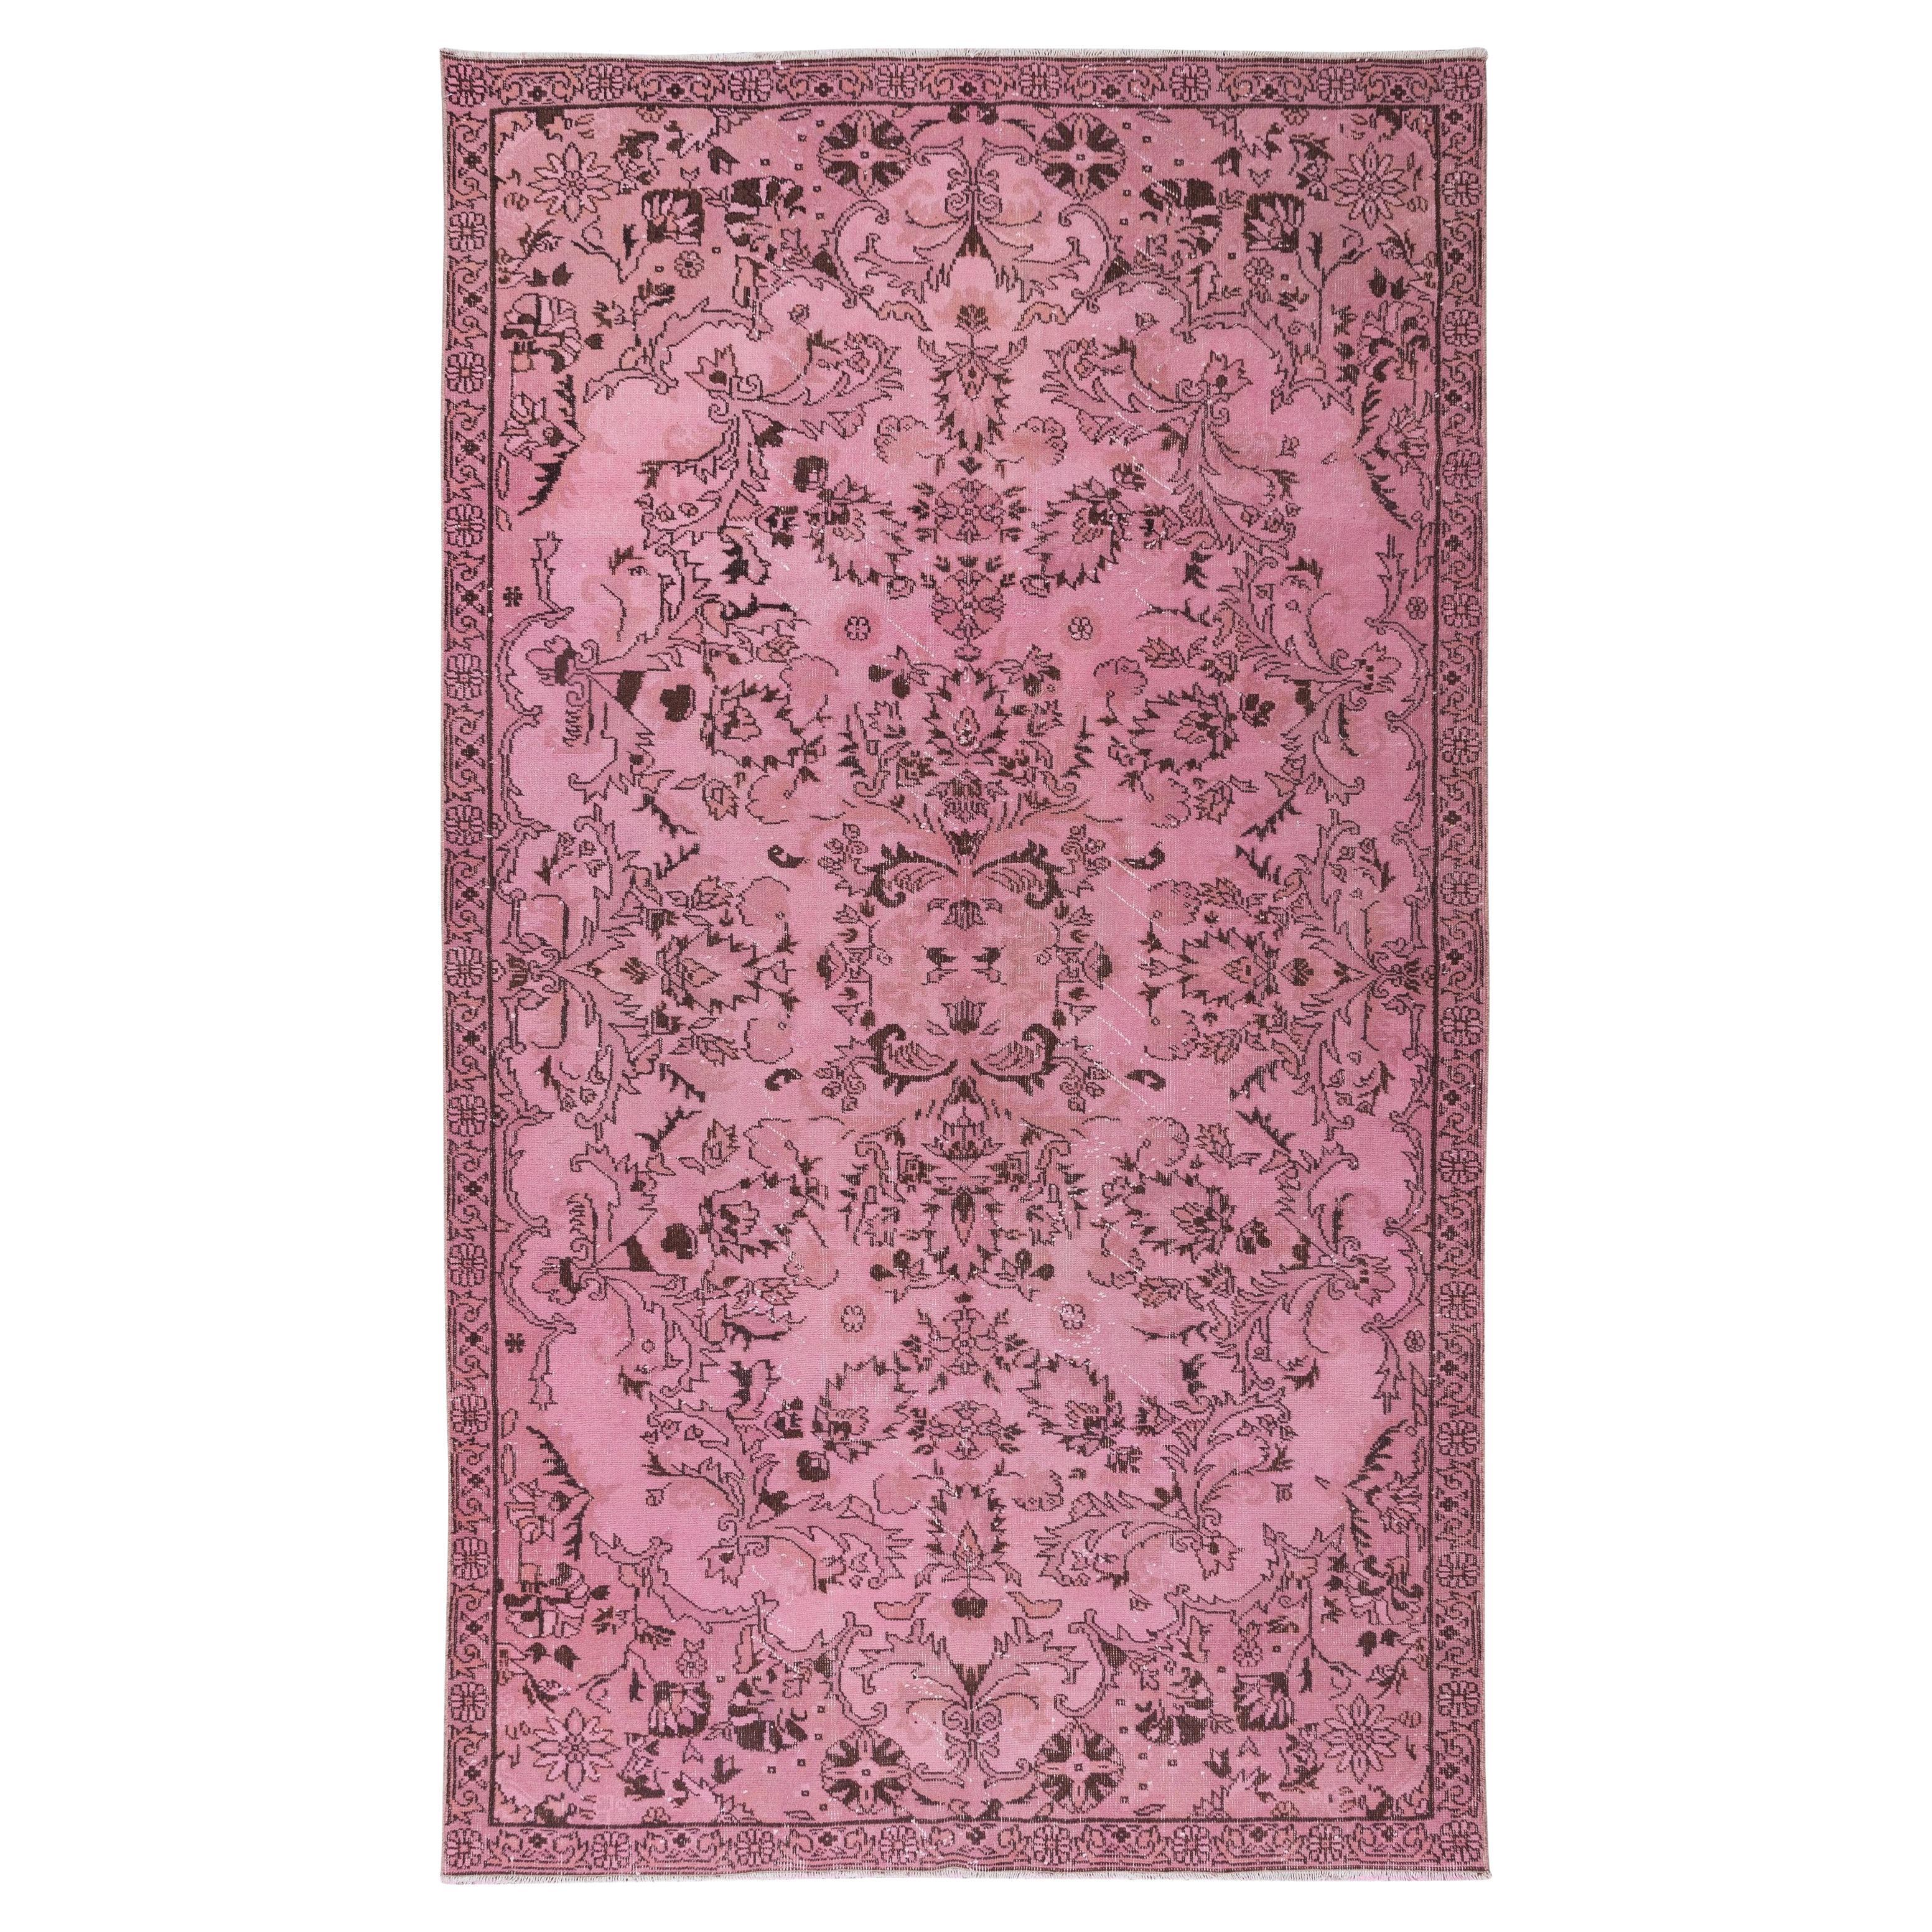 Handmade Anatolian Vintage Wool Rug in Pink with Floral Garden Design